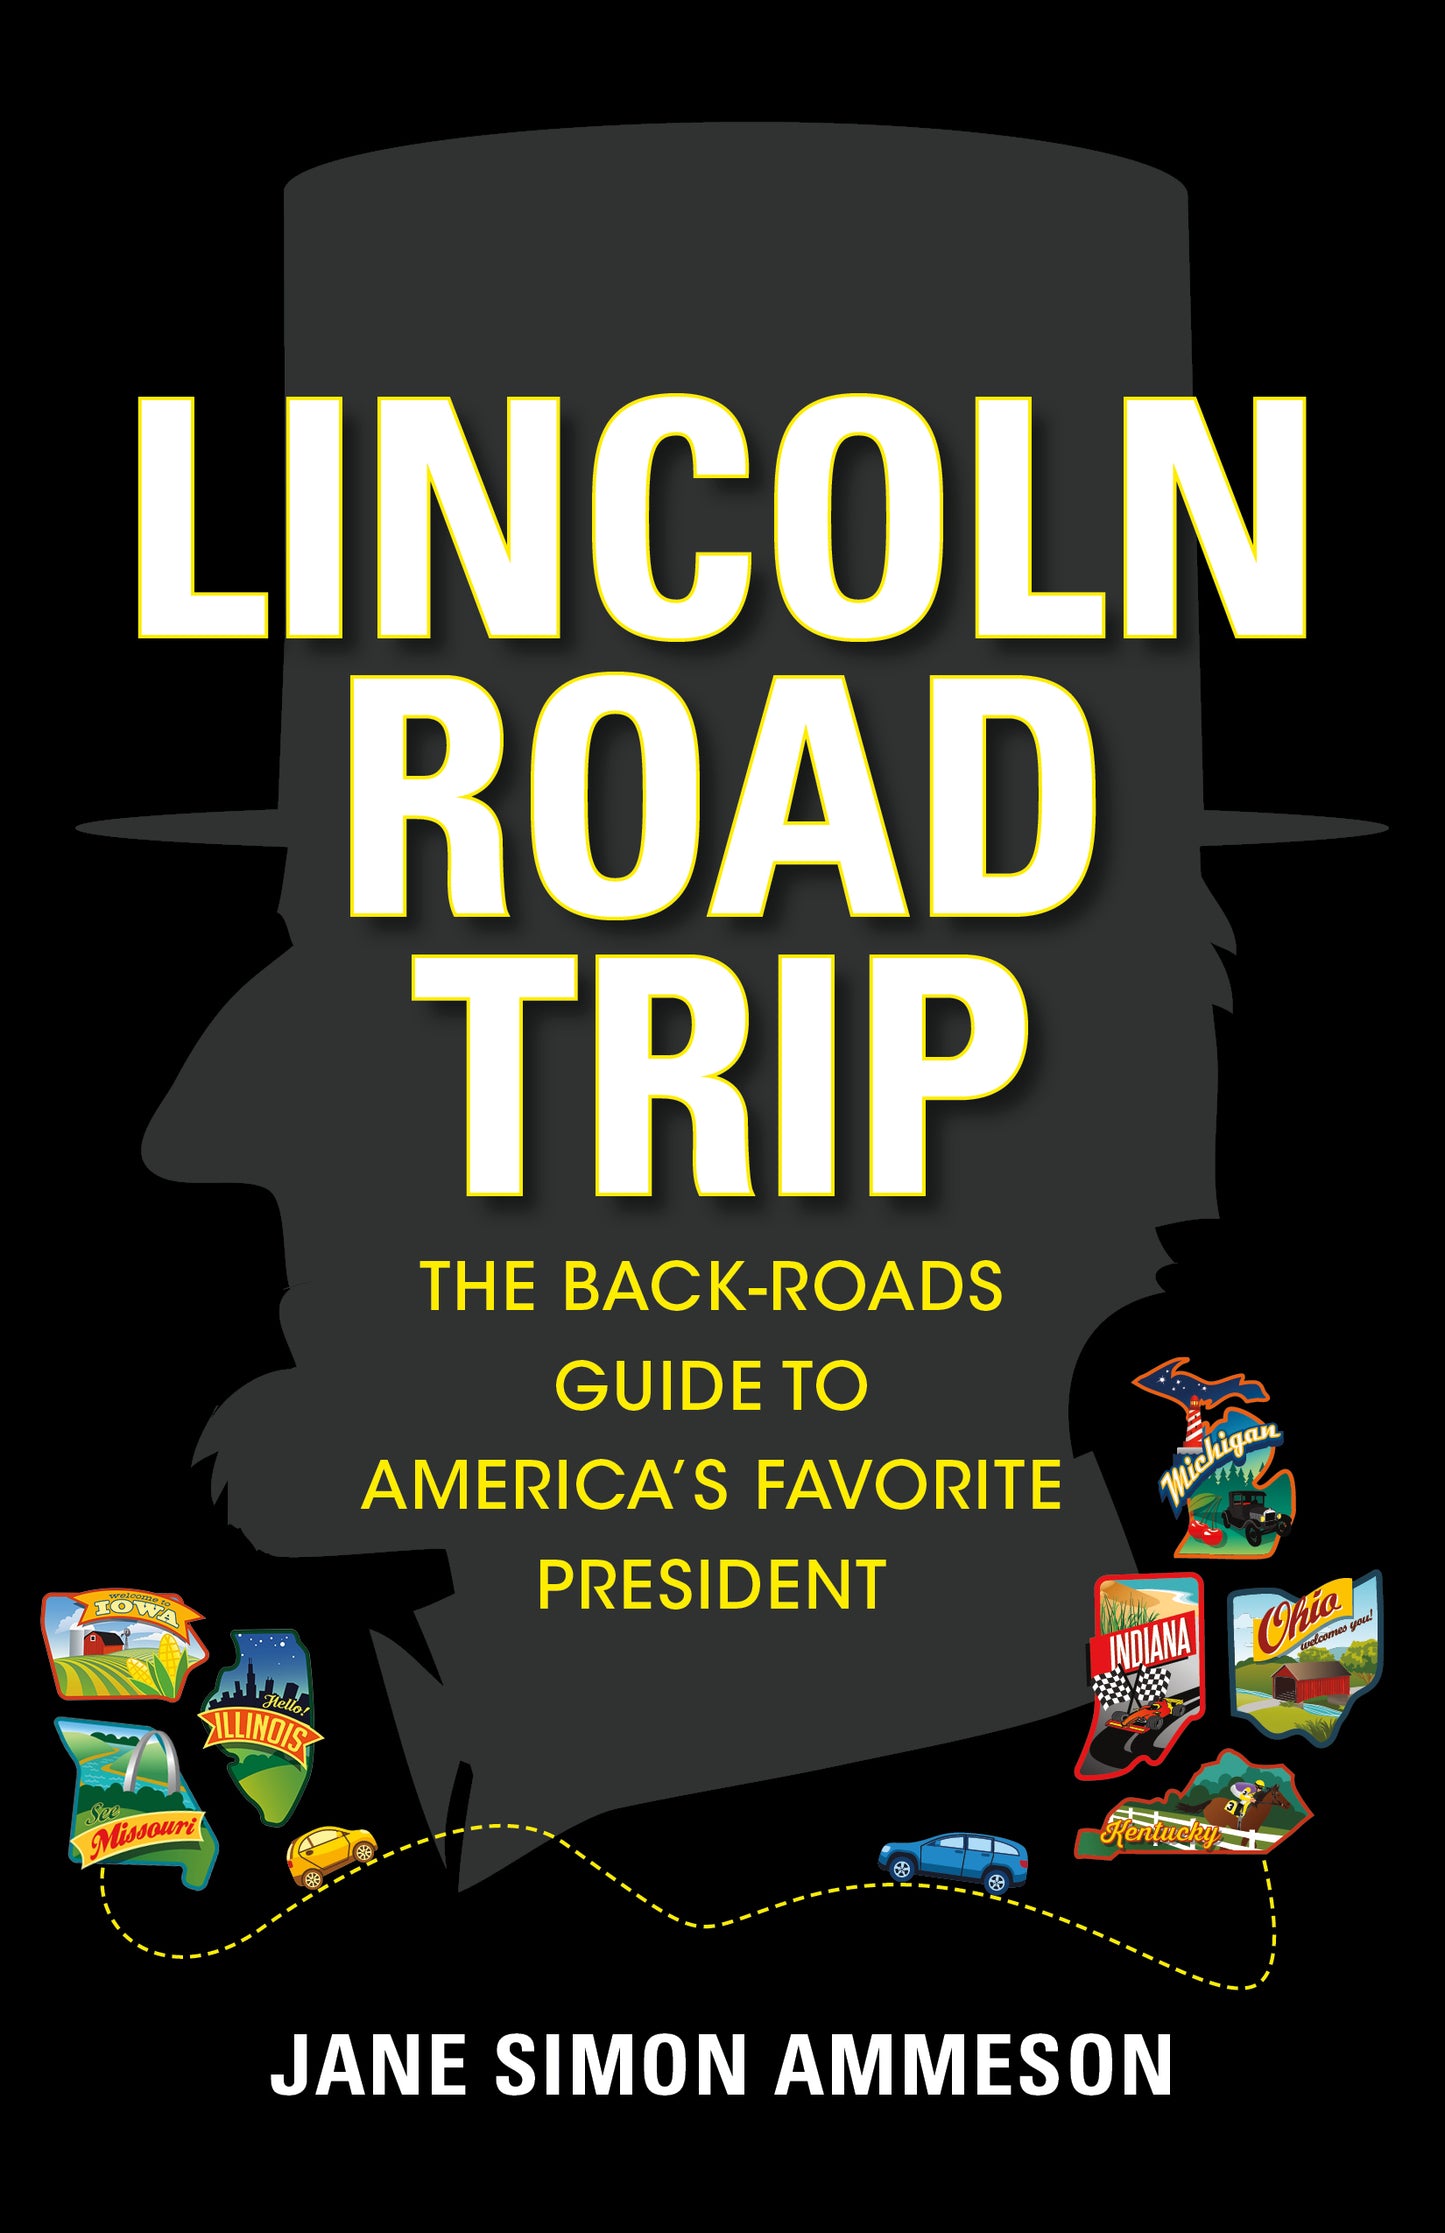 Lincoln Road Trip: The Back-Roads Guide to America